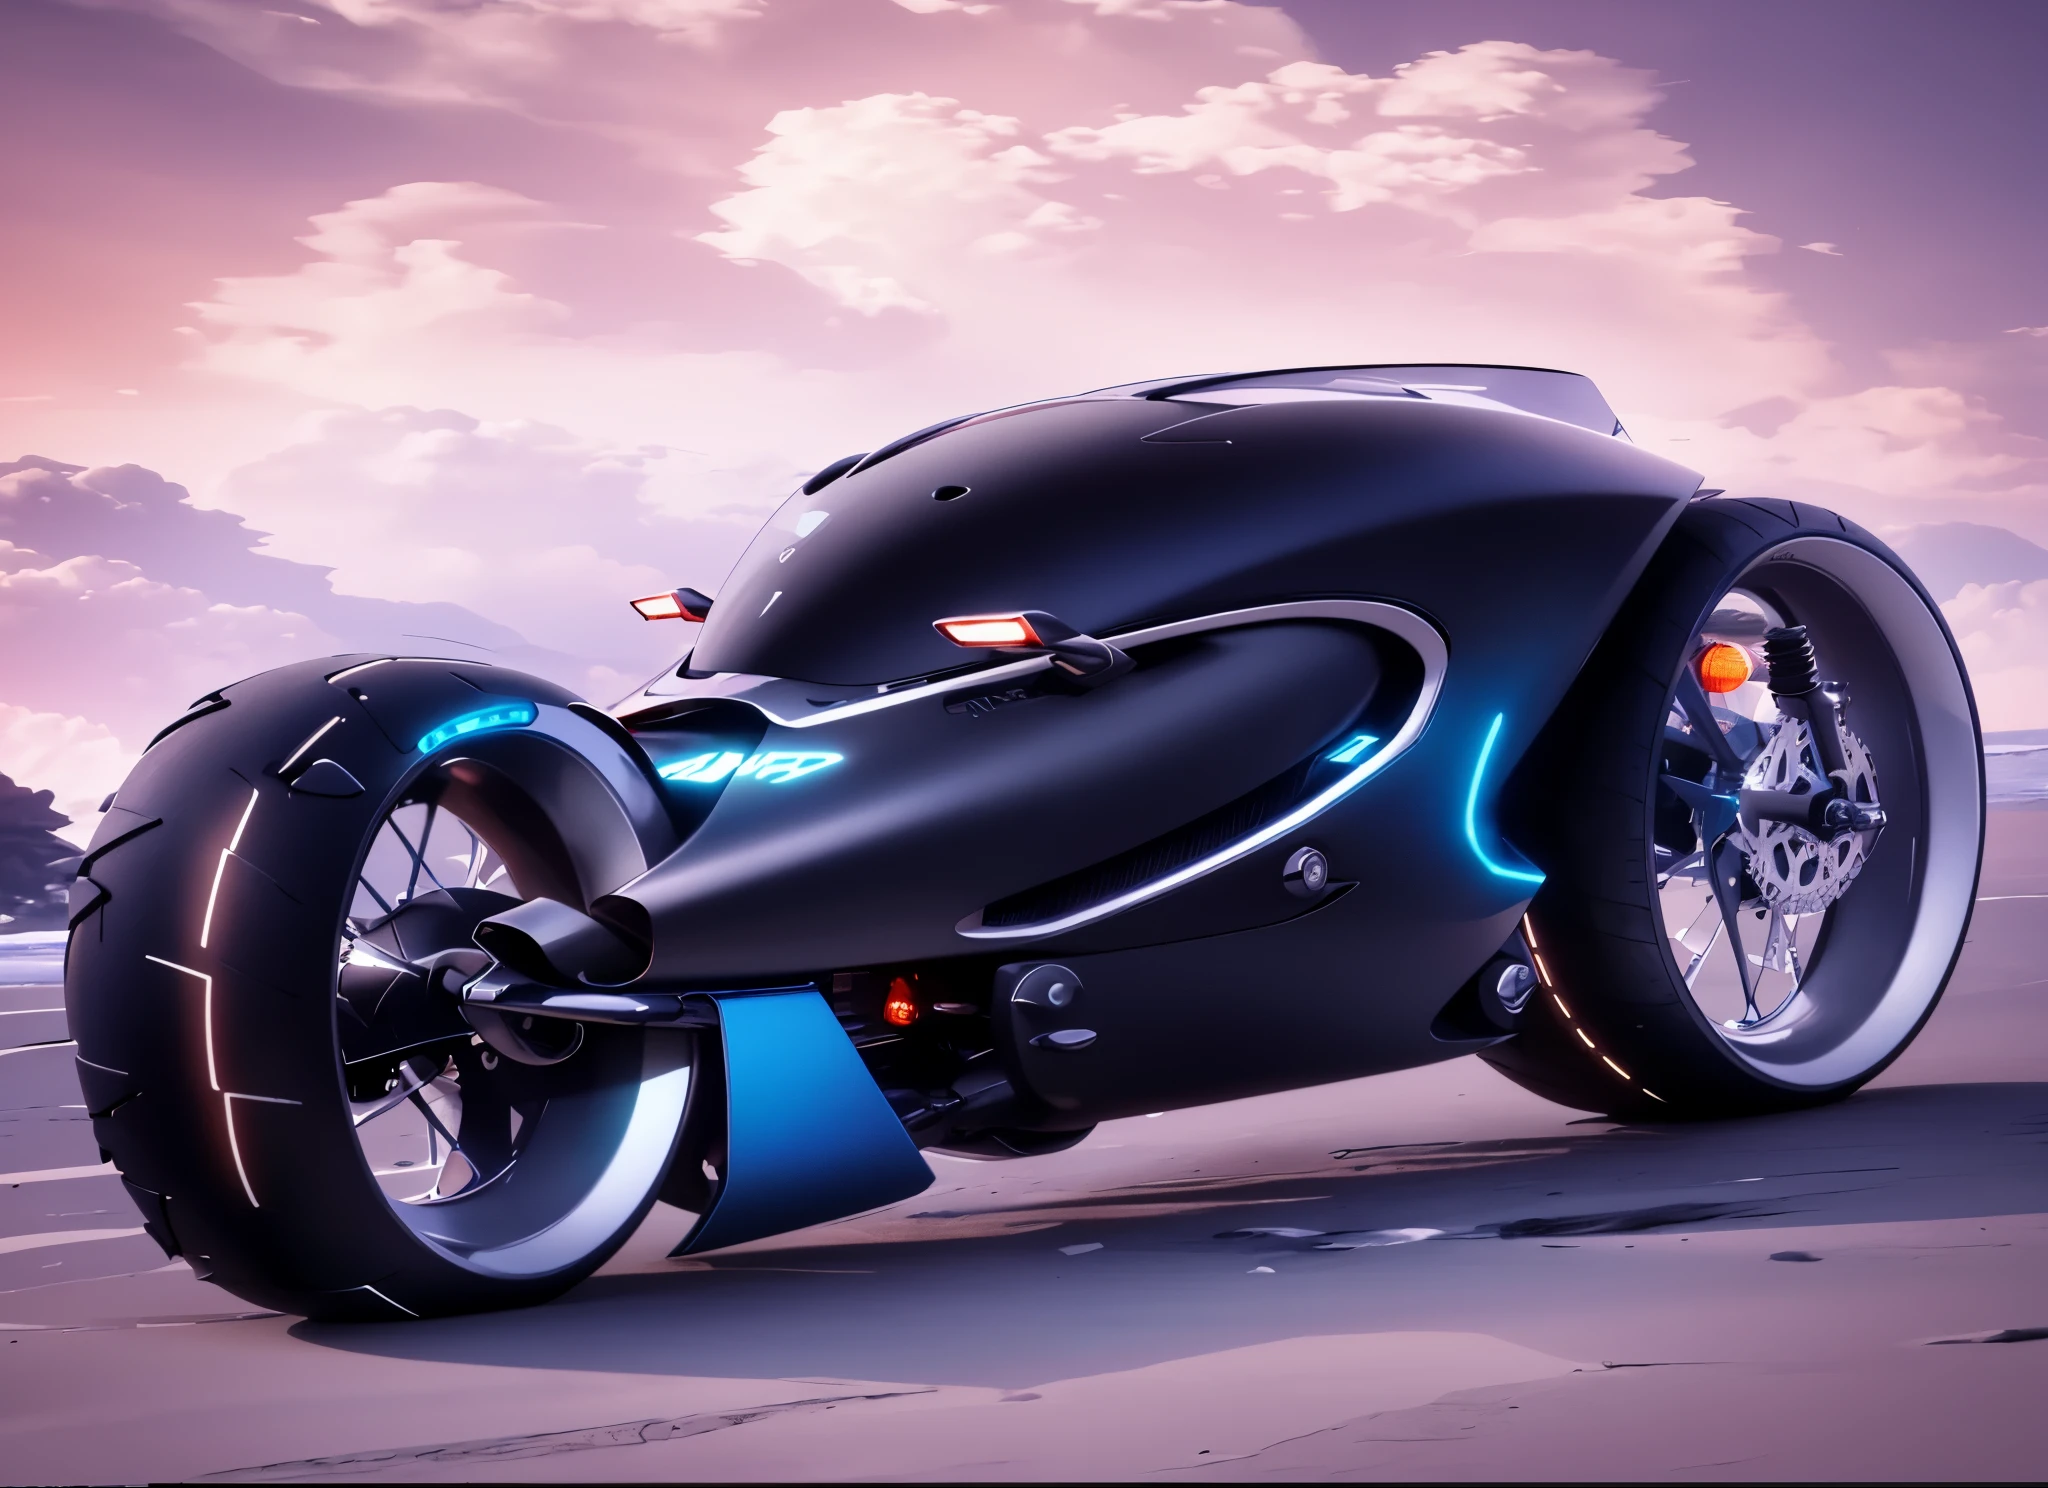 there is a motorcycle that is sitting on the sand by the water, futuristic motorcycle, futuristic suzuki, cycle render, riding a futuristic motorcycle, cycles 3 d render, motorcycle concept art, cycles4d render, sitting on cyberpunk motorbike, daniel maidman octane rendering, super rendered in octane render, cycles render, cycles render 4k, akira motorcycle, motorcycle